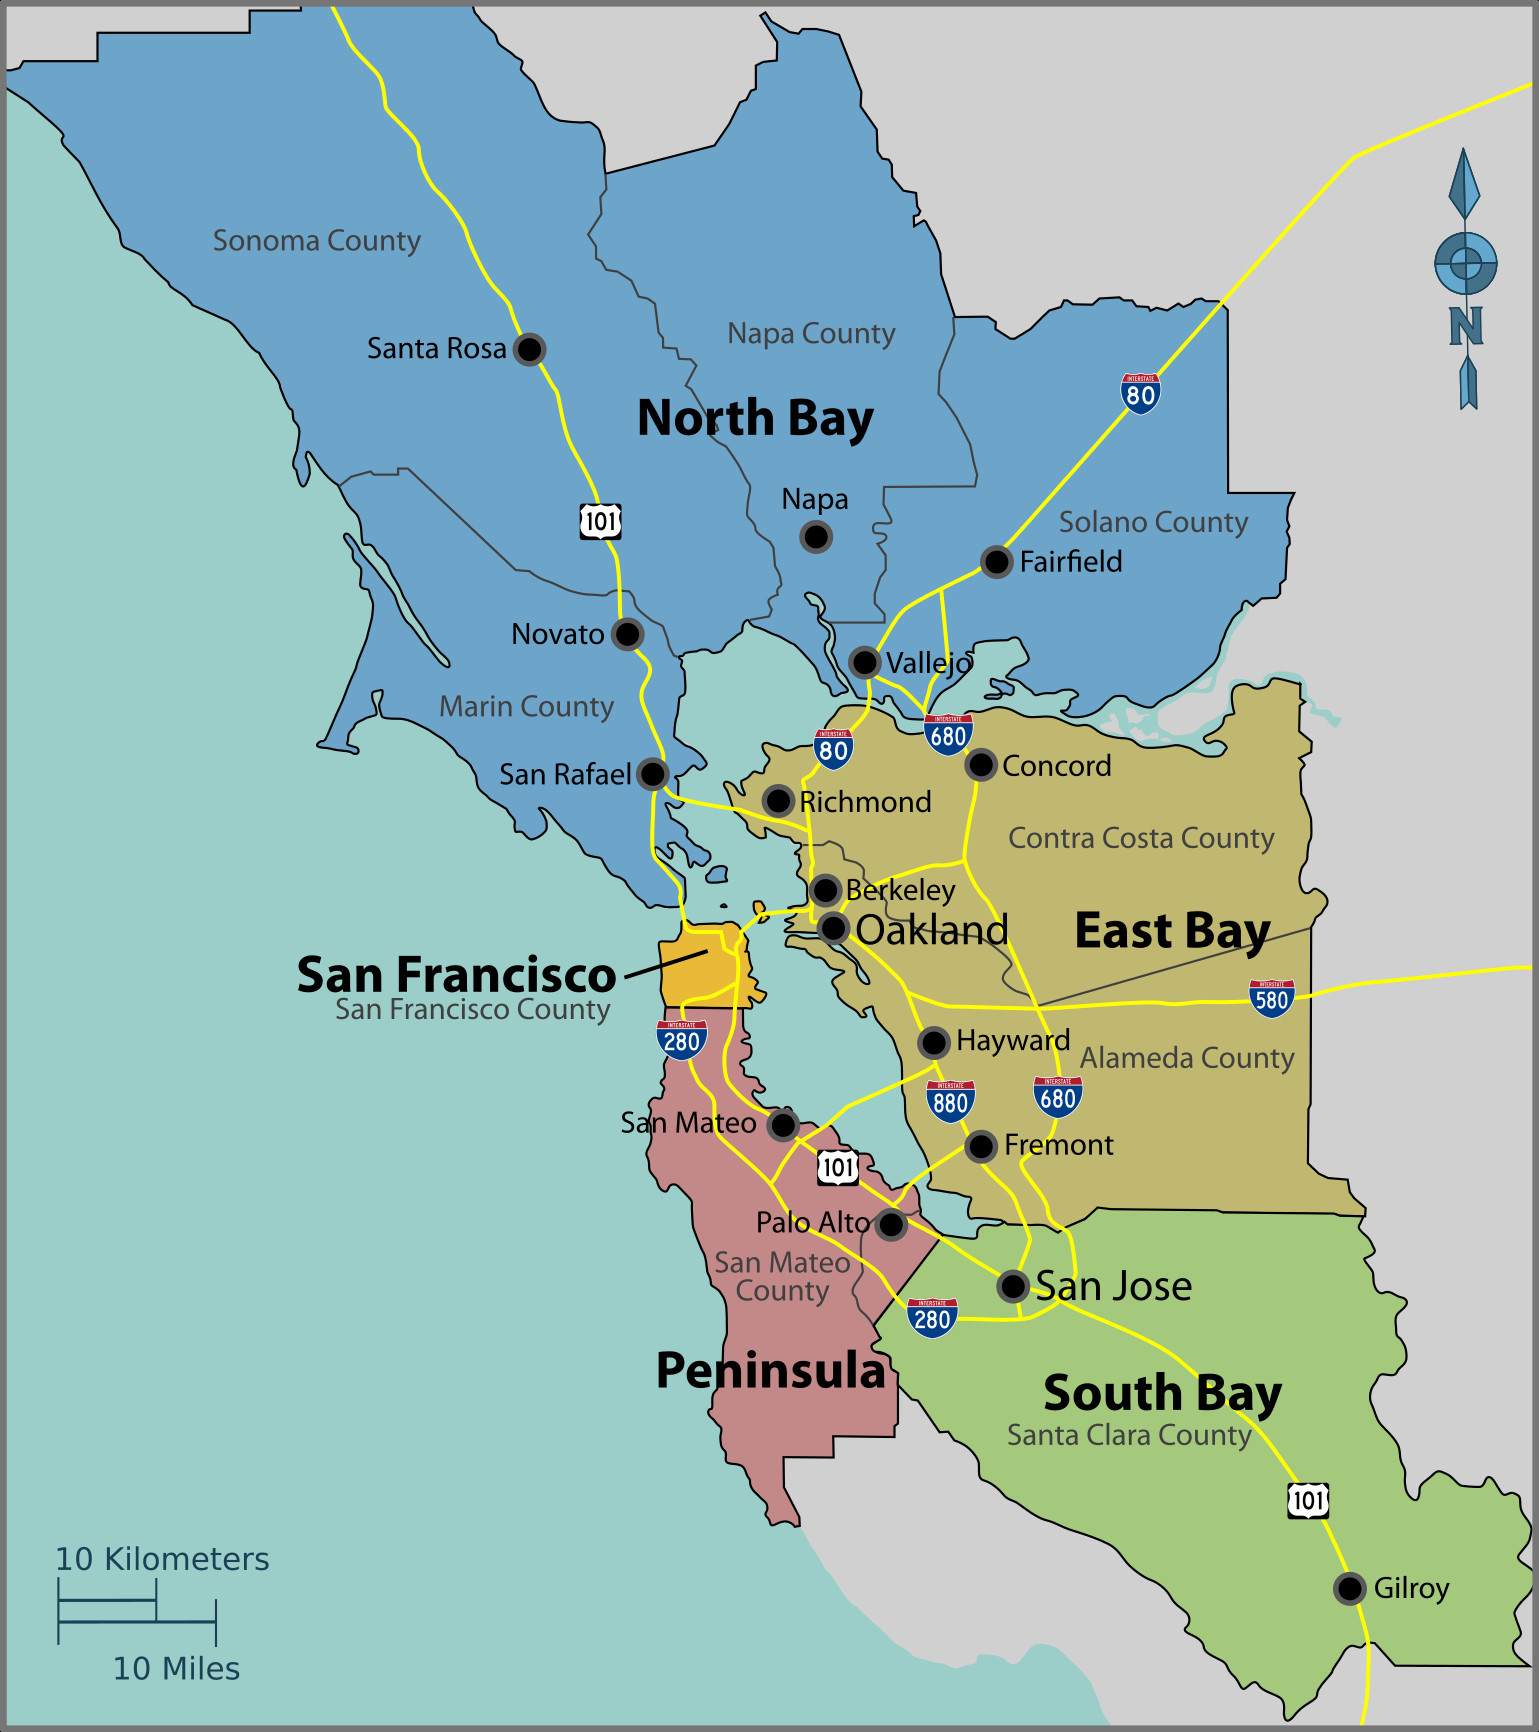 Southern California School Districts Map New San Francisco Bay Area - California School Districts Map